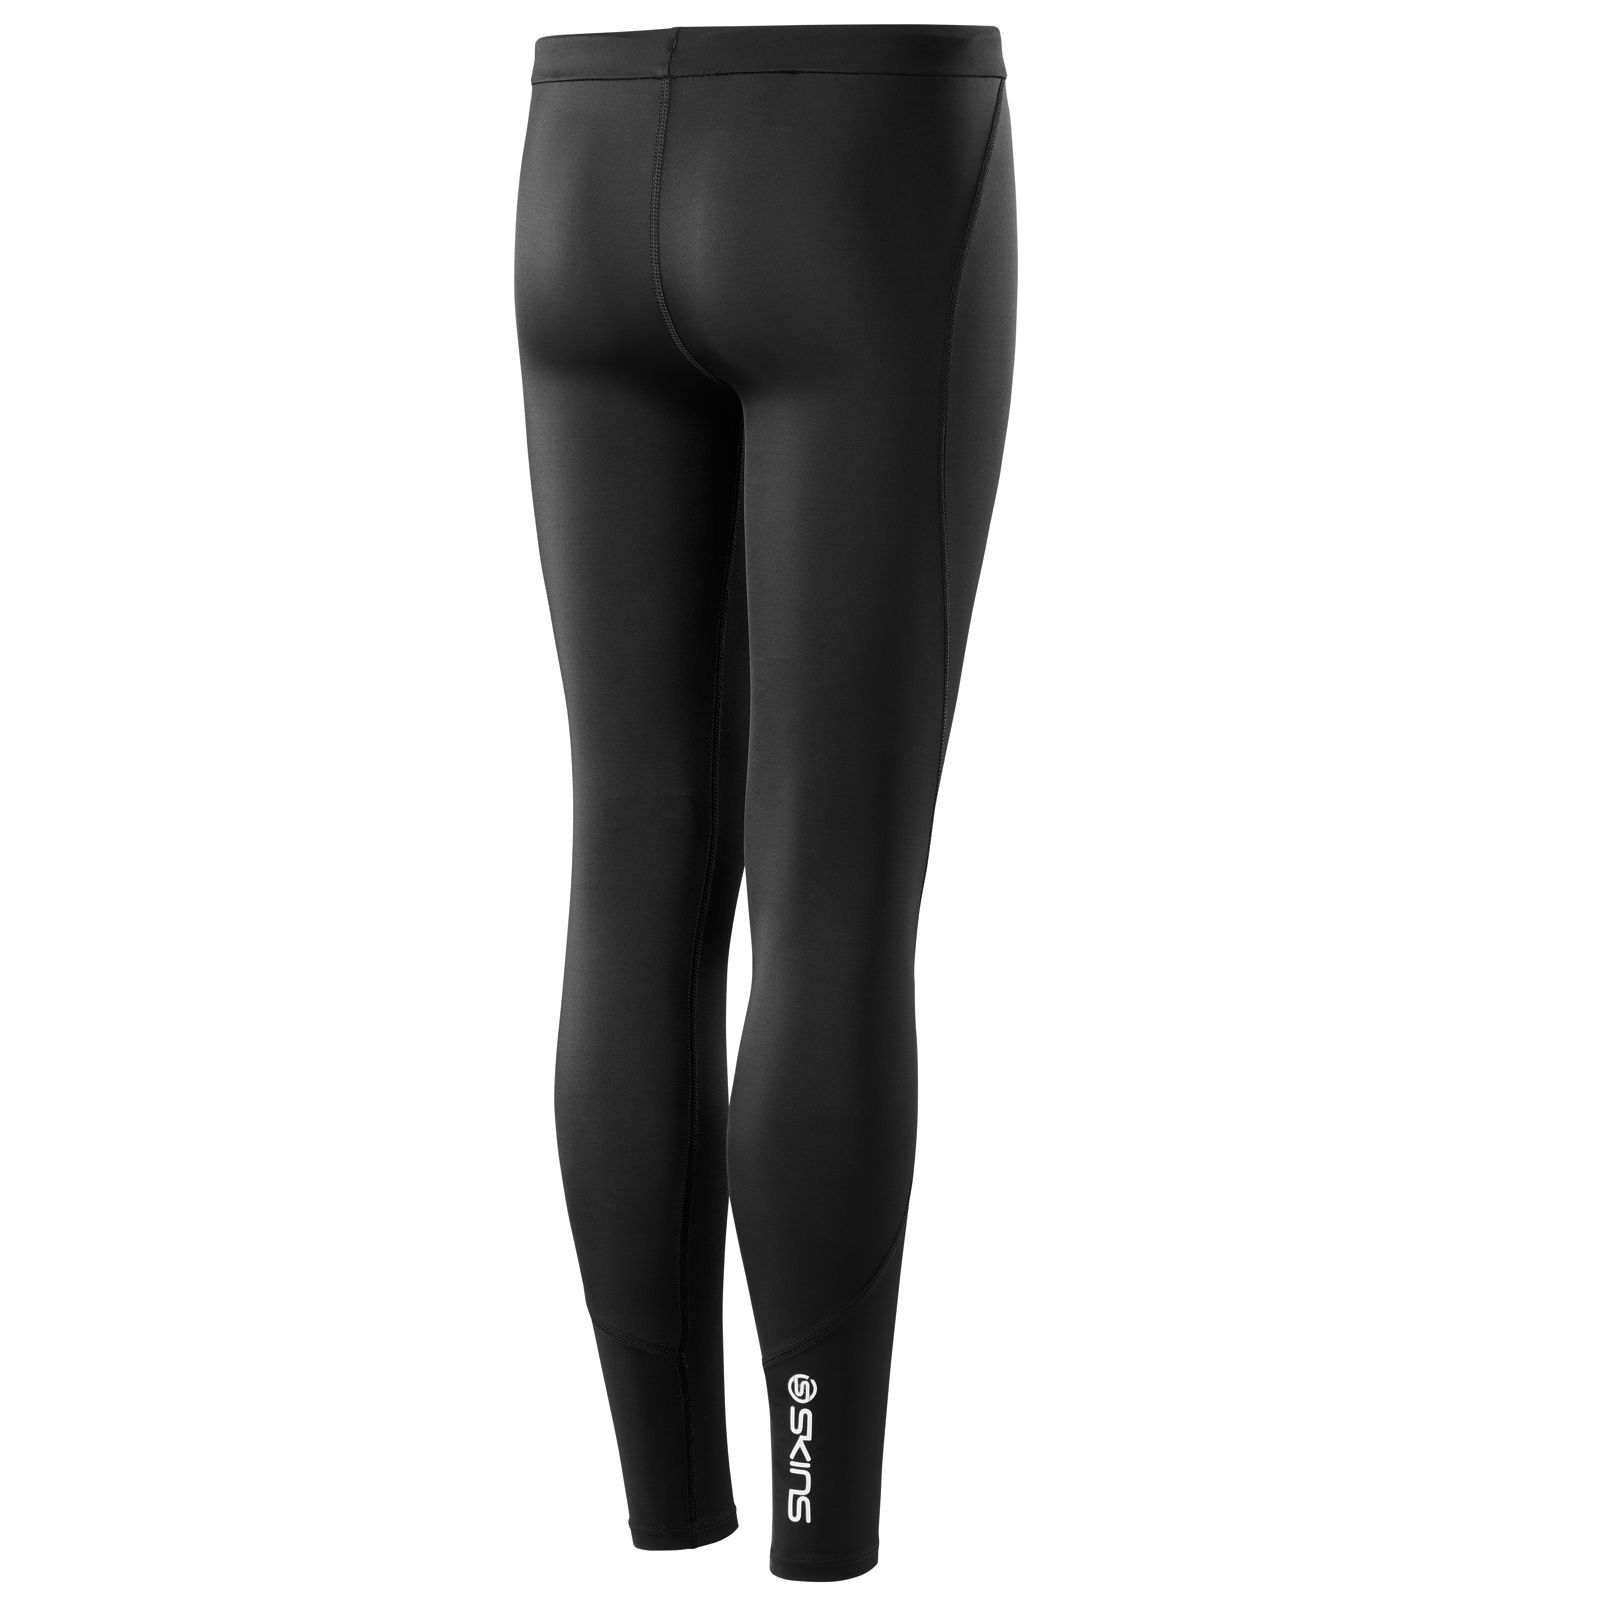 SKINS SERIES-1 YOUTH LONG TIGHTS BLACK - SKINS Compression USA